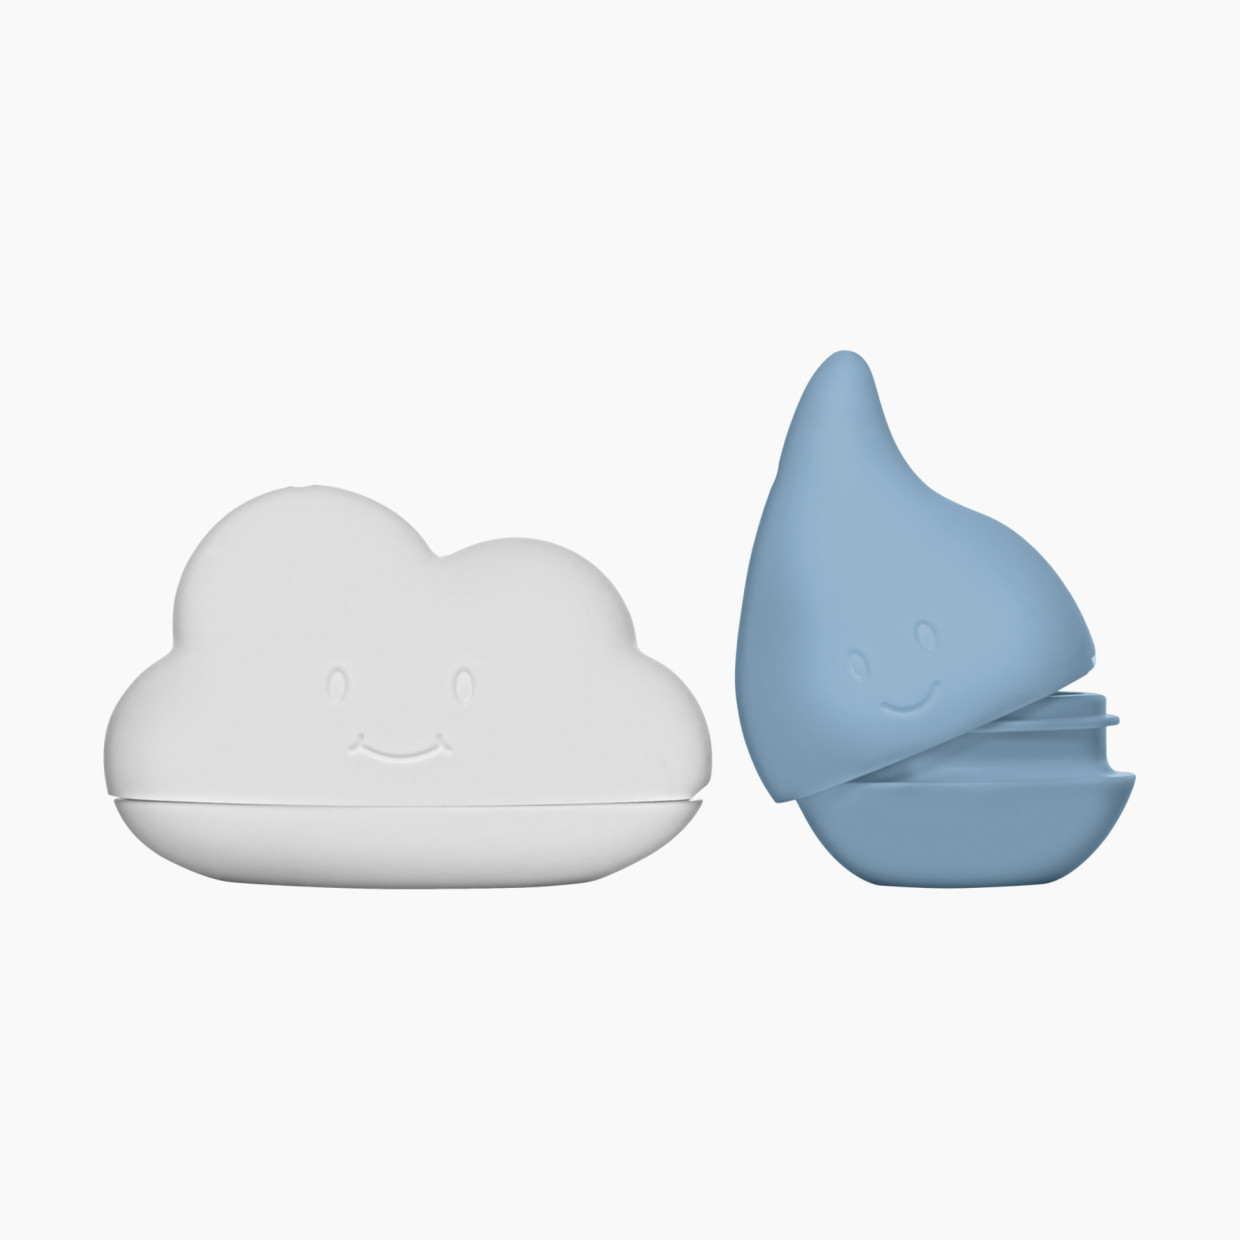 Ubbi Cloud and Droplet Bath Toys - Muted.